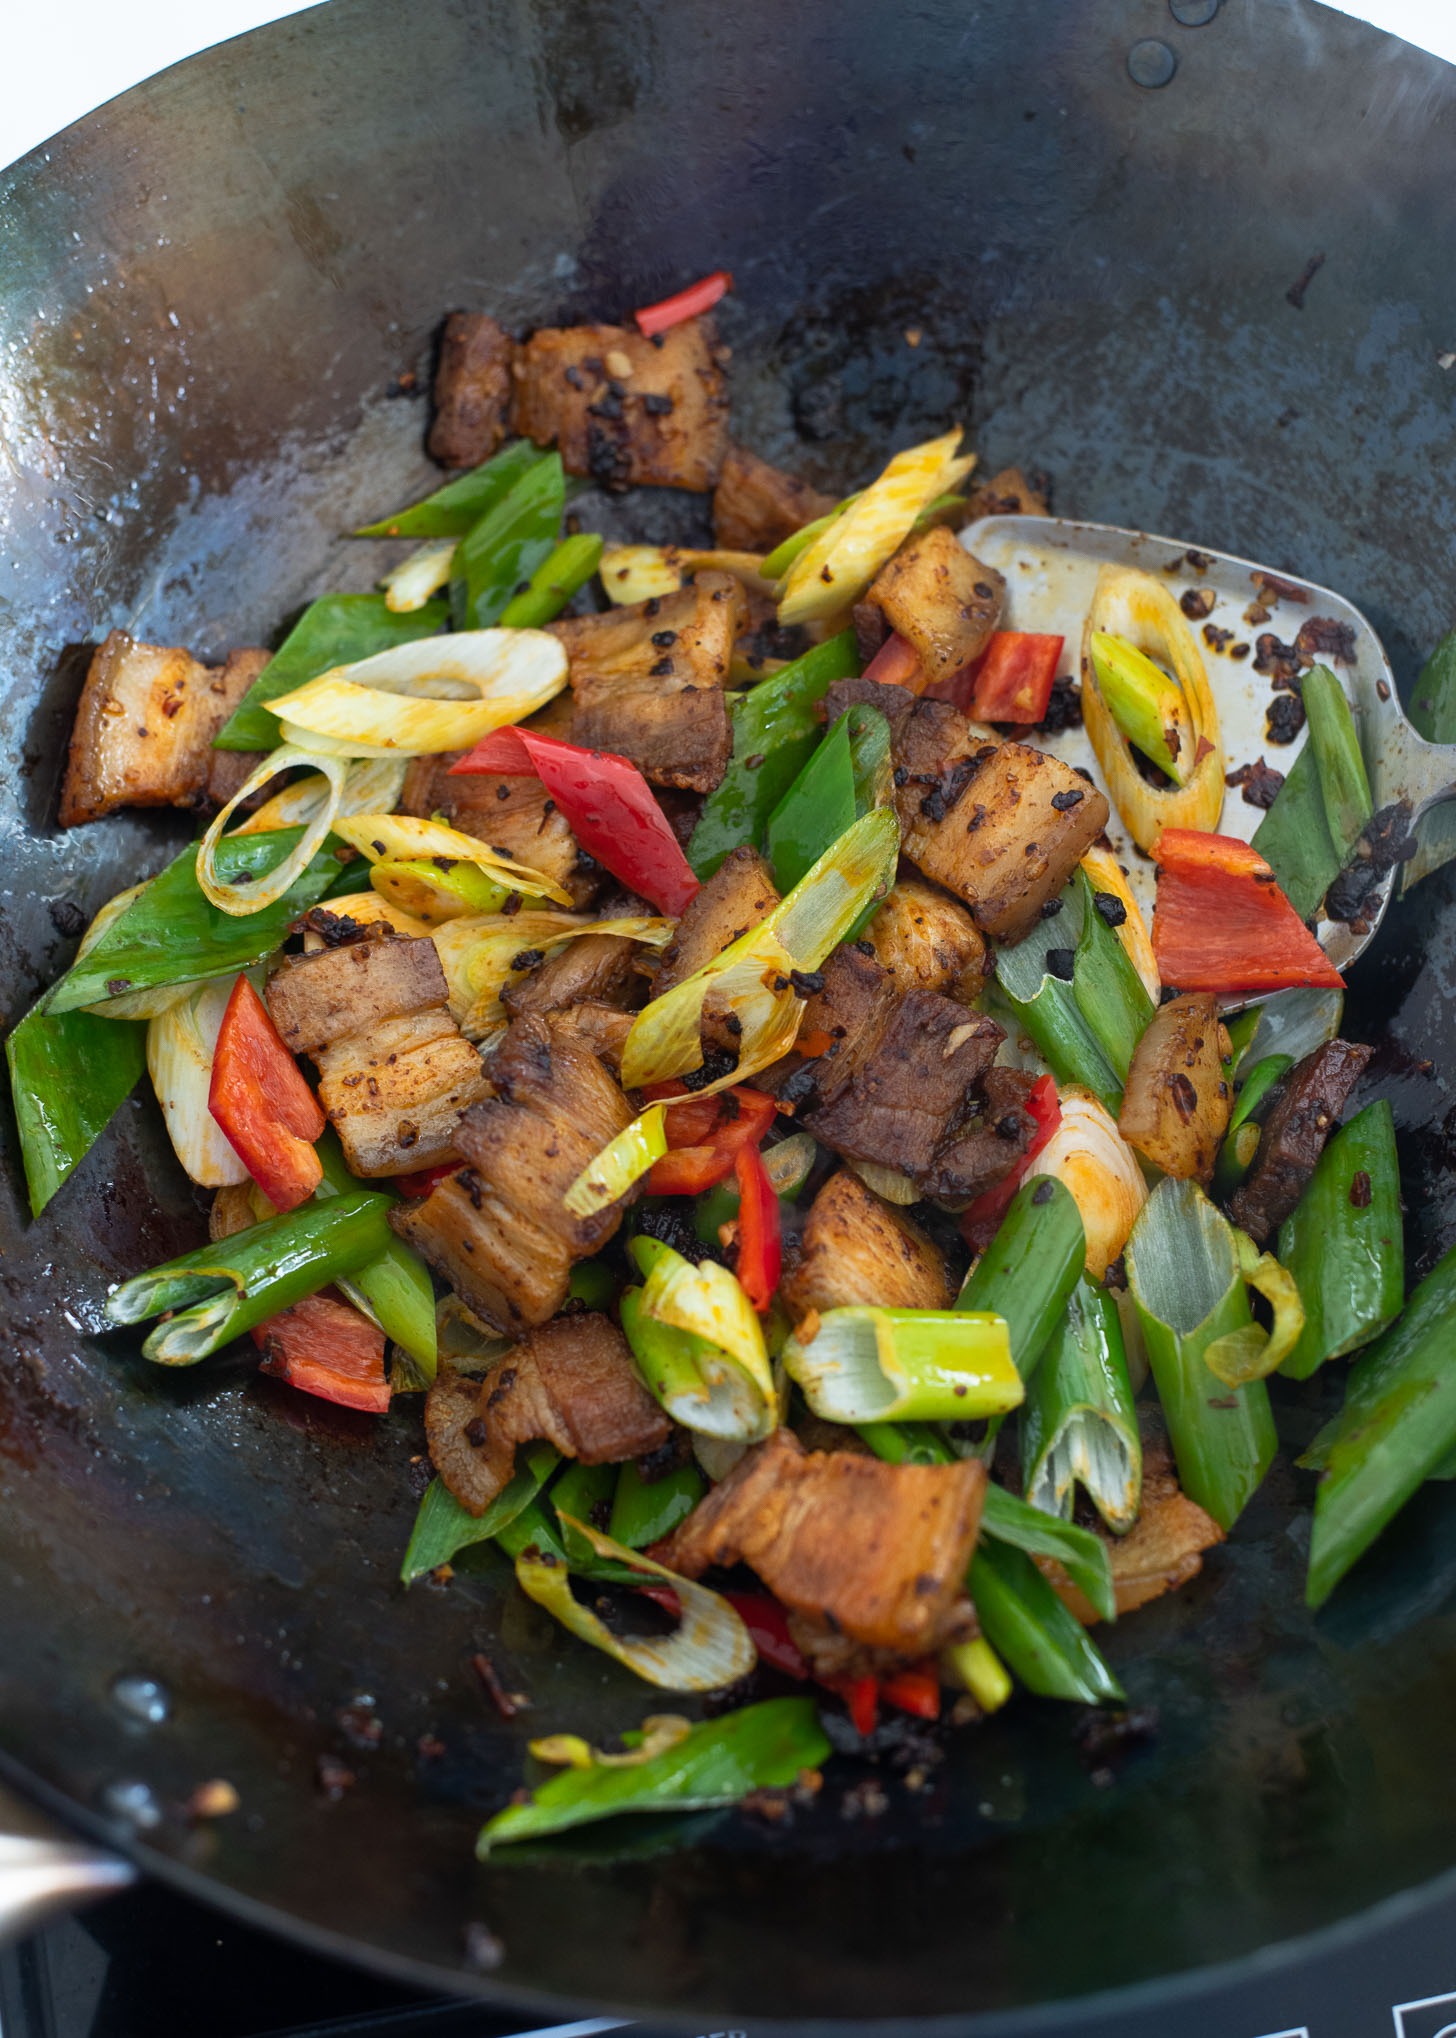 Asian leek and red chili added to Sichuan pork stir-fry